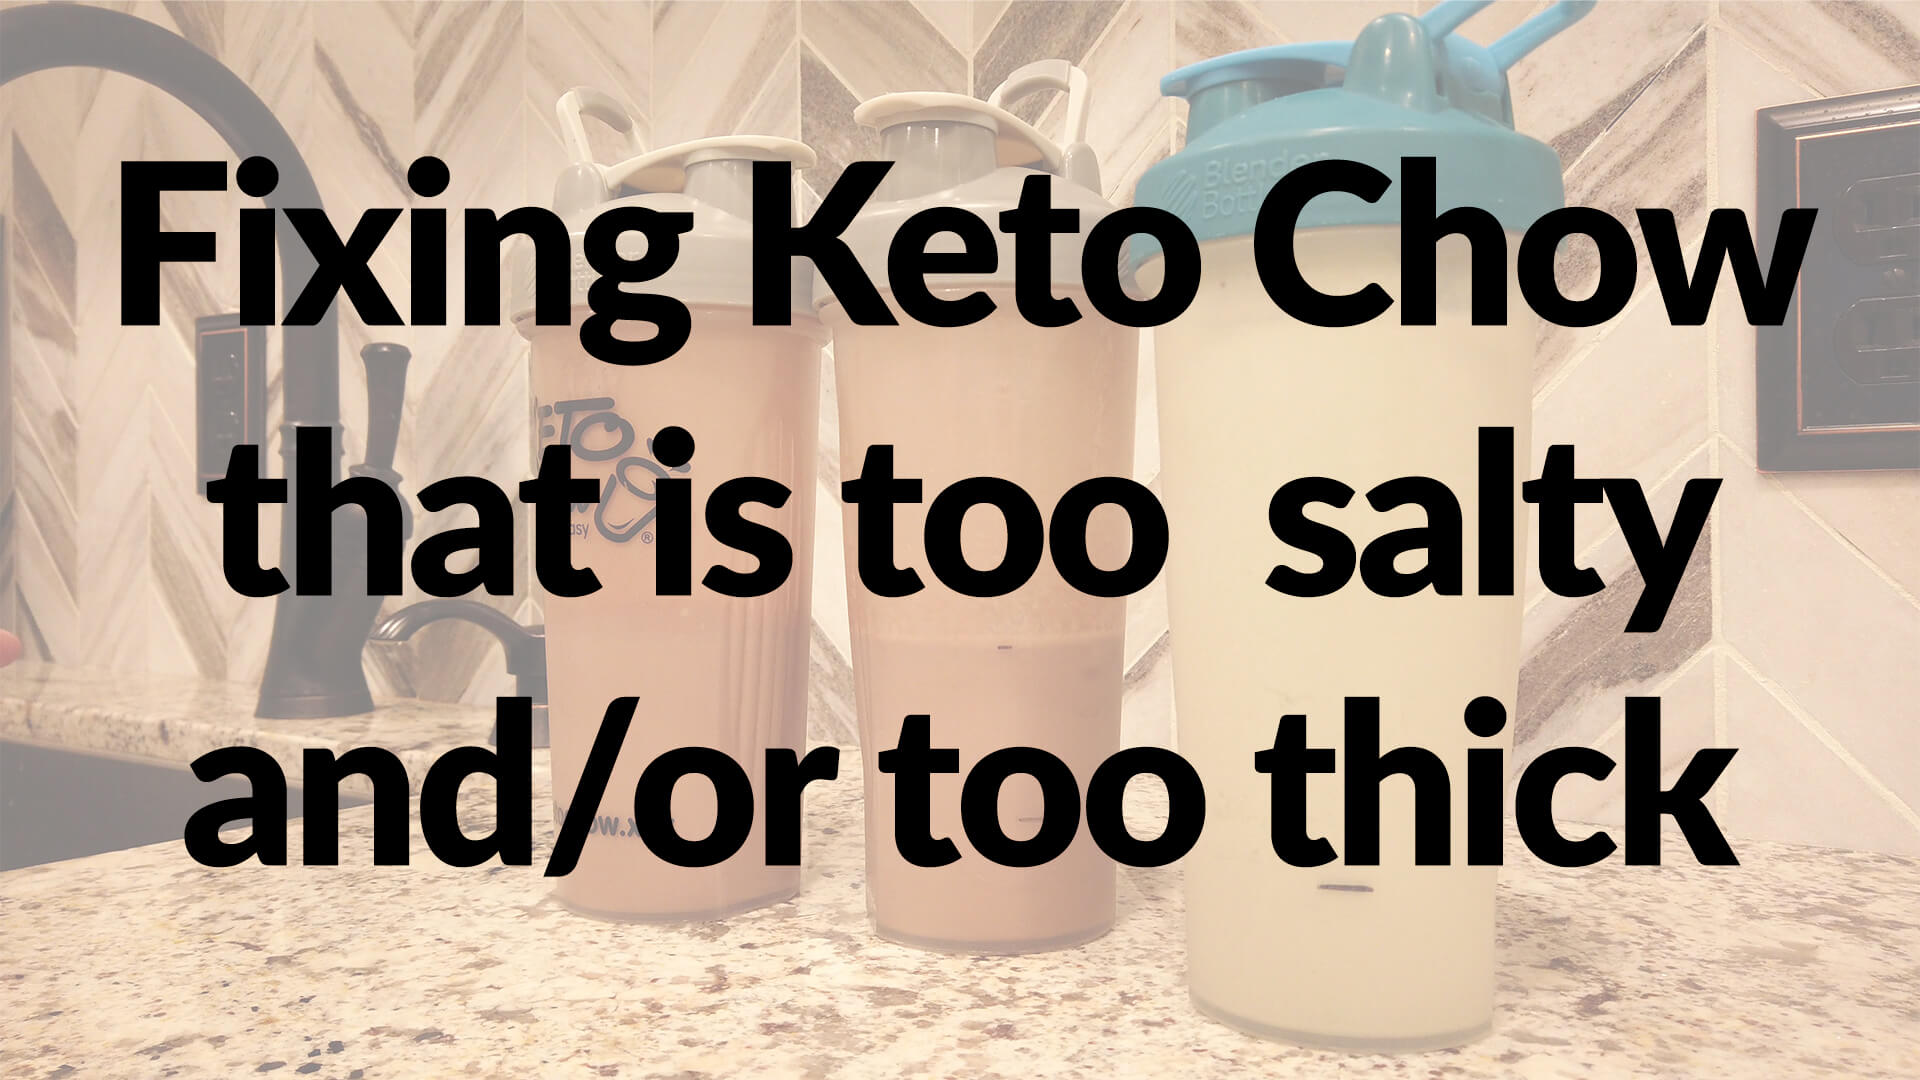 Fixing Keto Chow that's too salty or thick